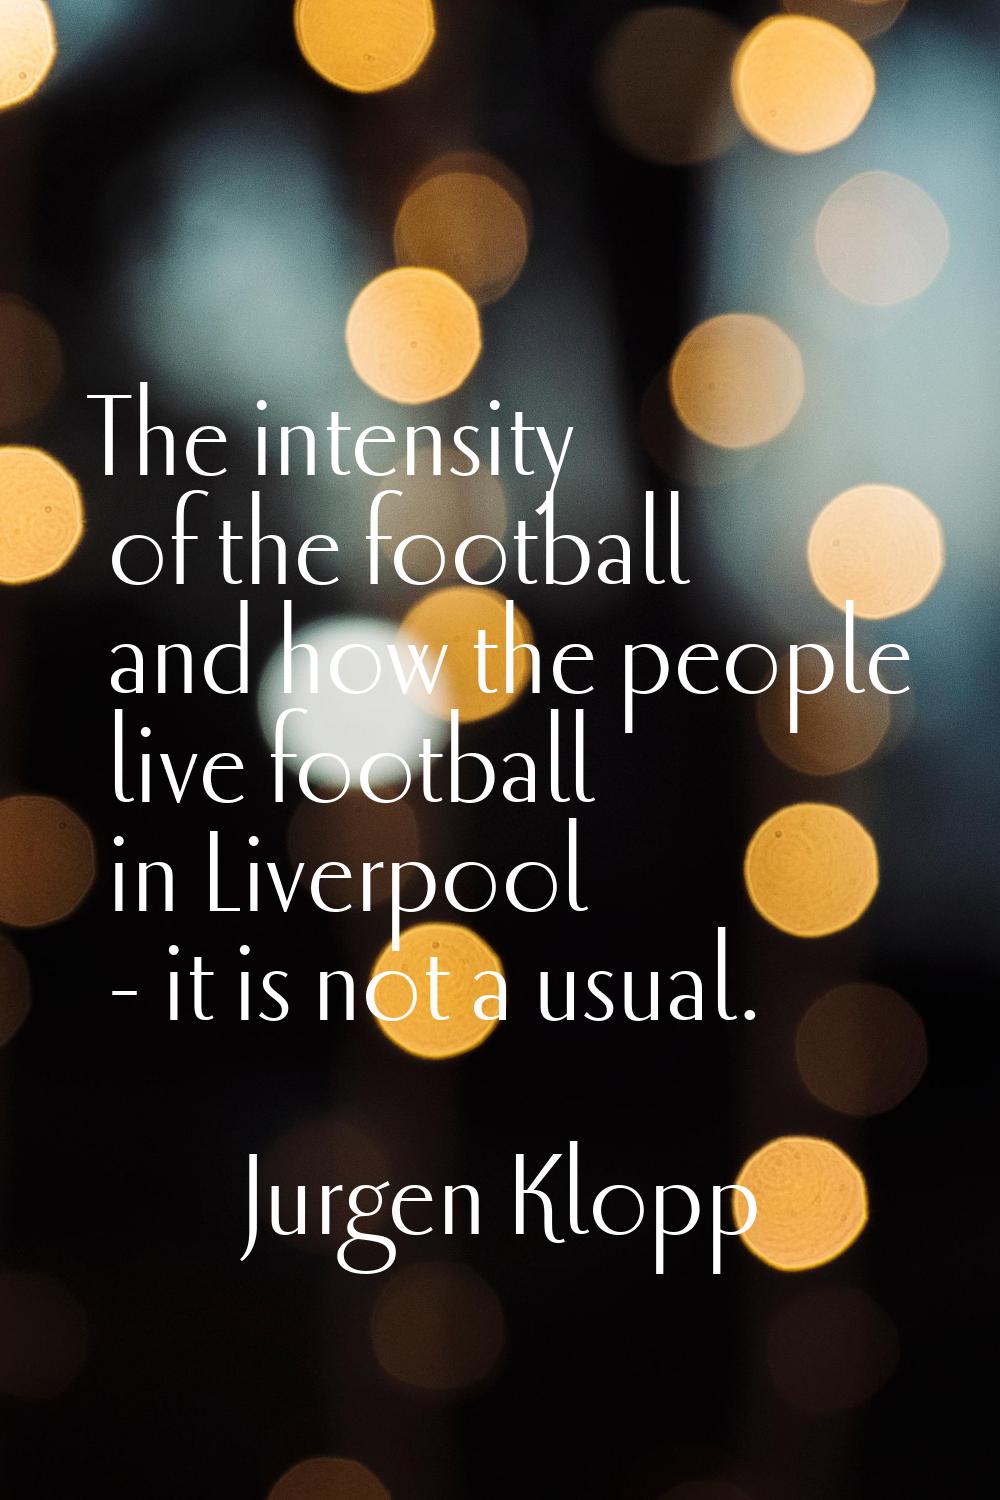 The intensity of the football and how the people live football in Liverpool - it is not a usual.